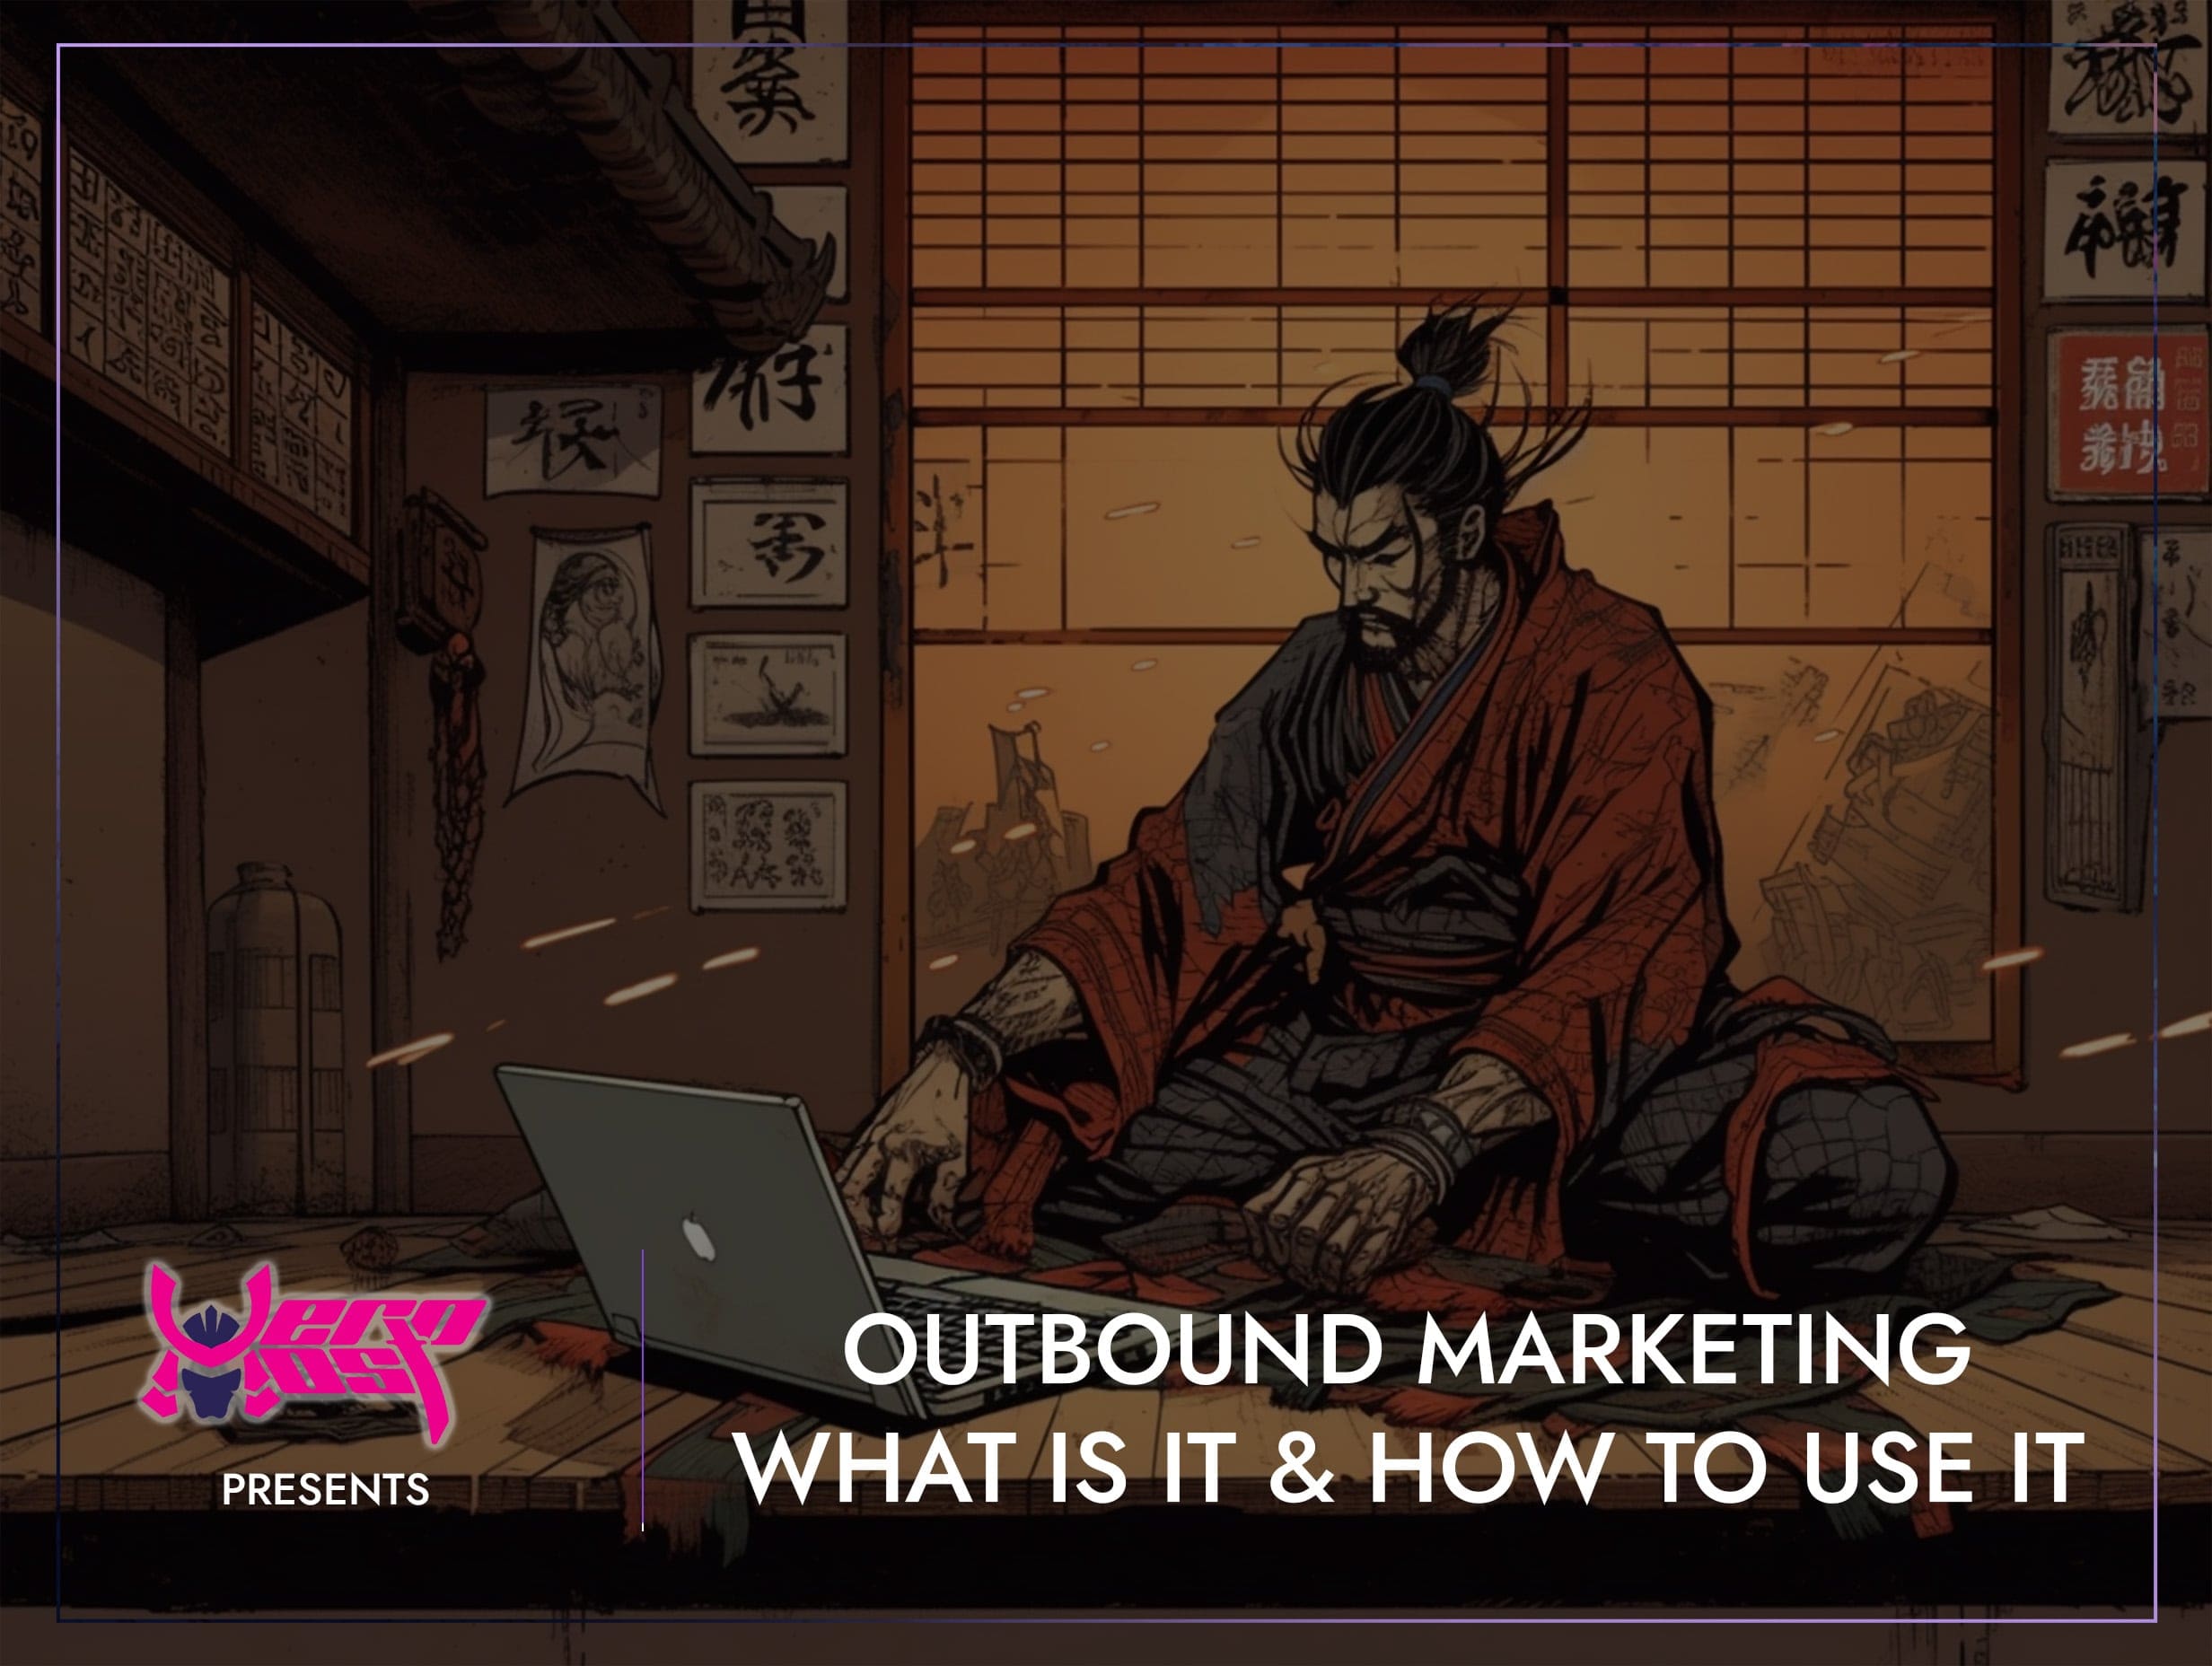 Outbound marketing what is it and how to use it